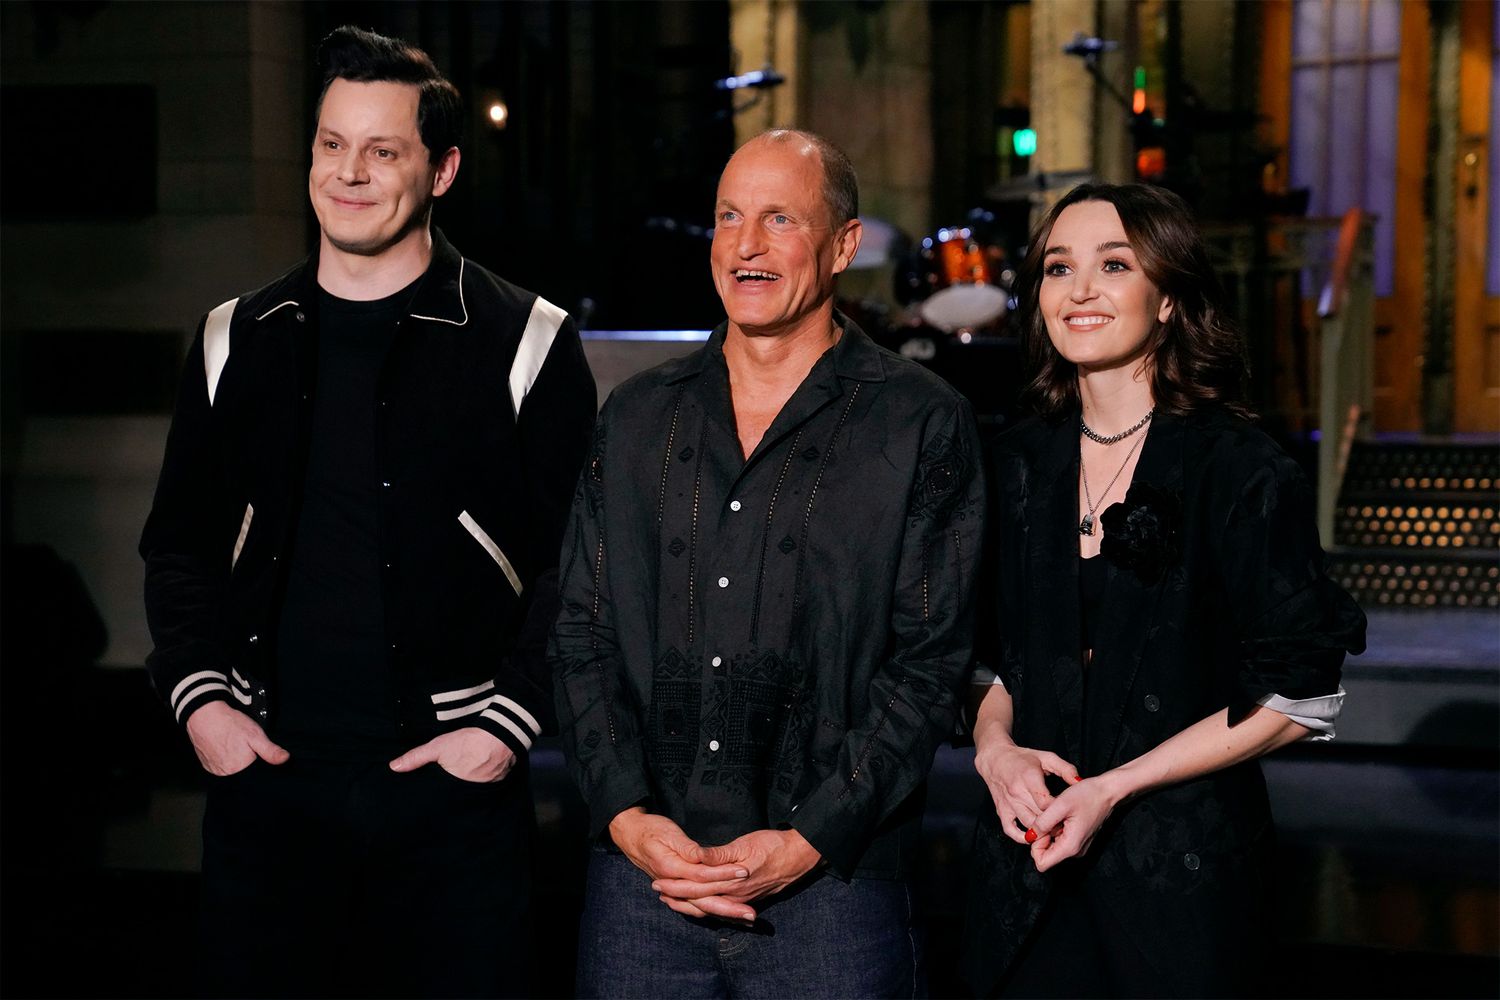 SATURDAY NIGHT LIVE -- “Woody Harrelson, Jack White” Episode 1839 -- Pictured: (l-r) Musical Guest Jack White, Host Woody Harrelson, and Chloe Fineman during Promos in Studio 8H on Thursday, February 23, 2023